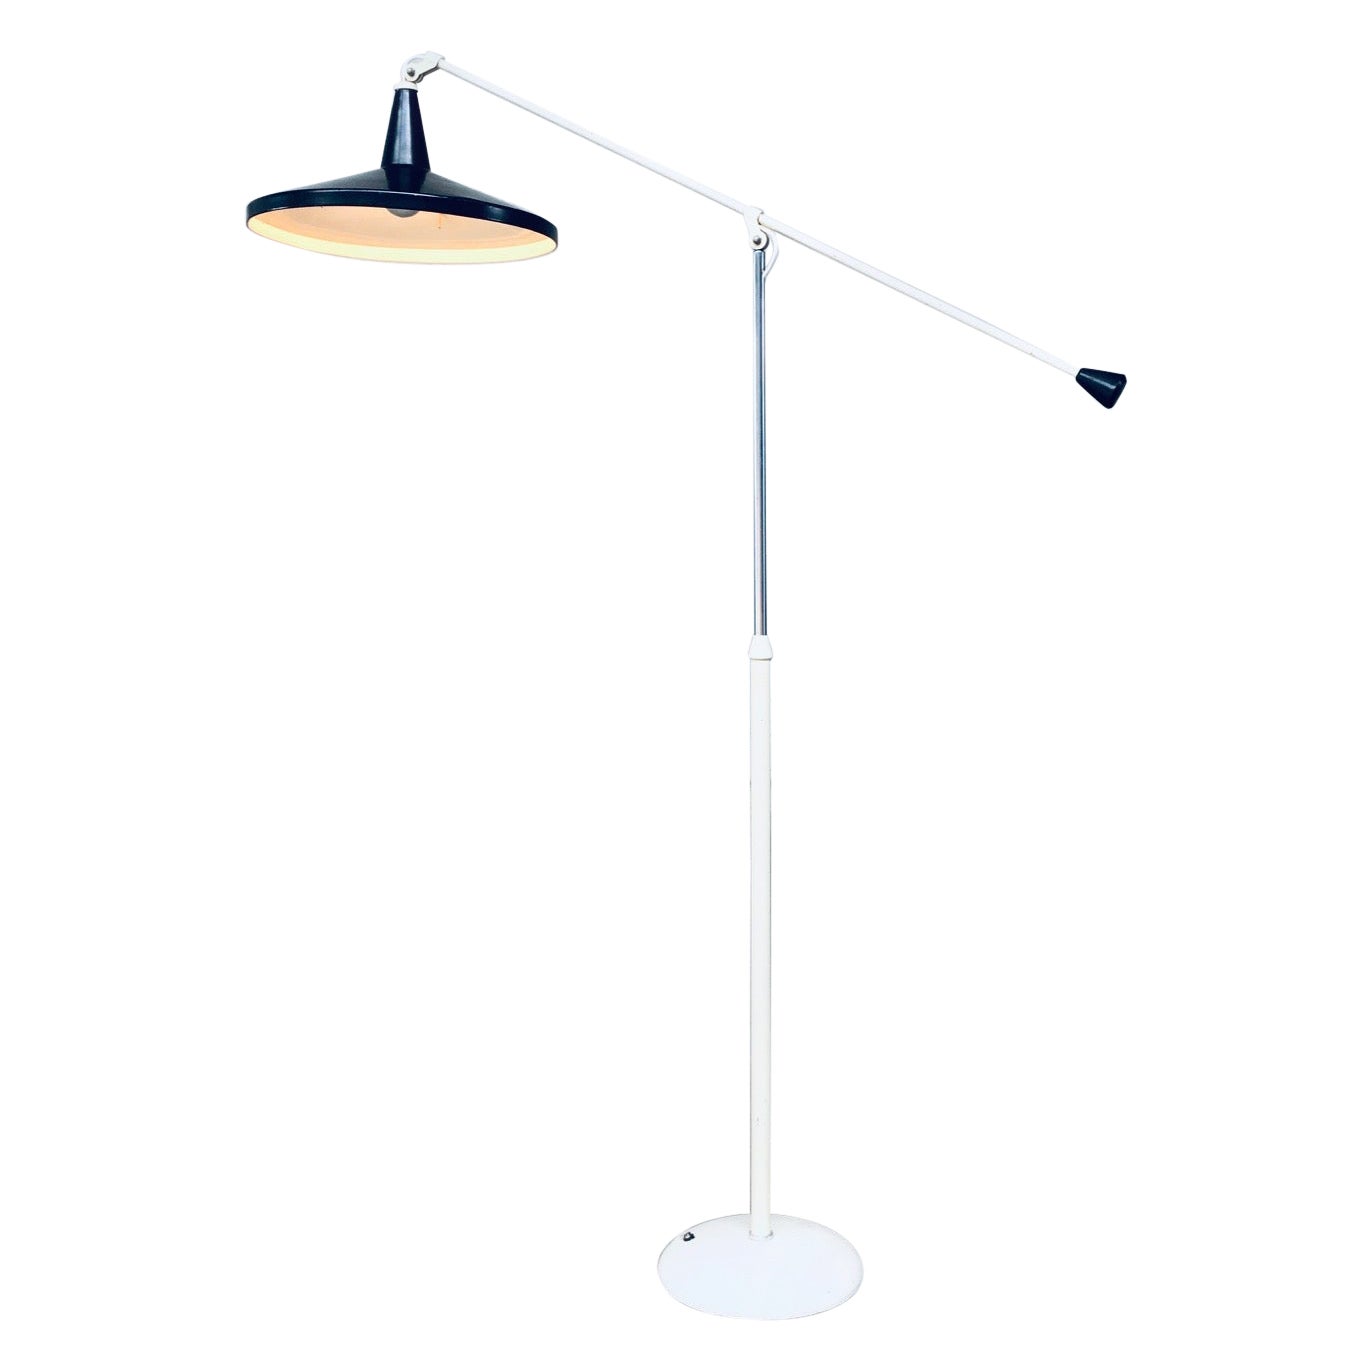 "PANAMA" Floor Lamp in black by Wim Rietveld for Gispen, 1957 For Sale